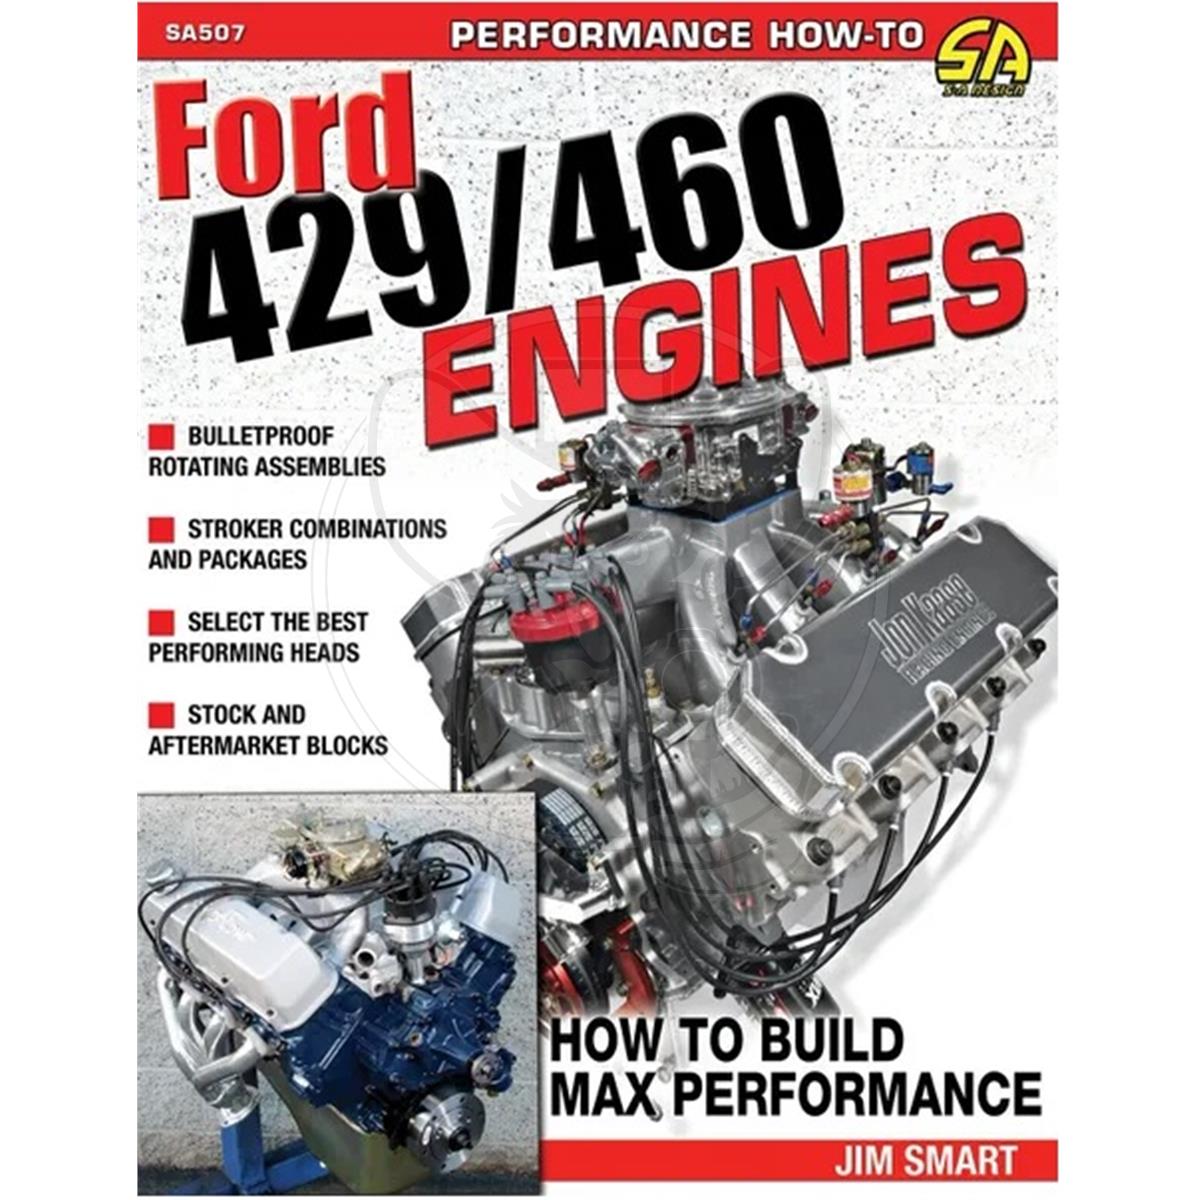 SA DESIGN BOOK FITS FORD 429-460 ENGINES HOW TO BUILD MAX PERFORMANCE